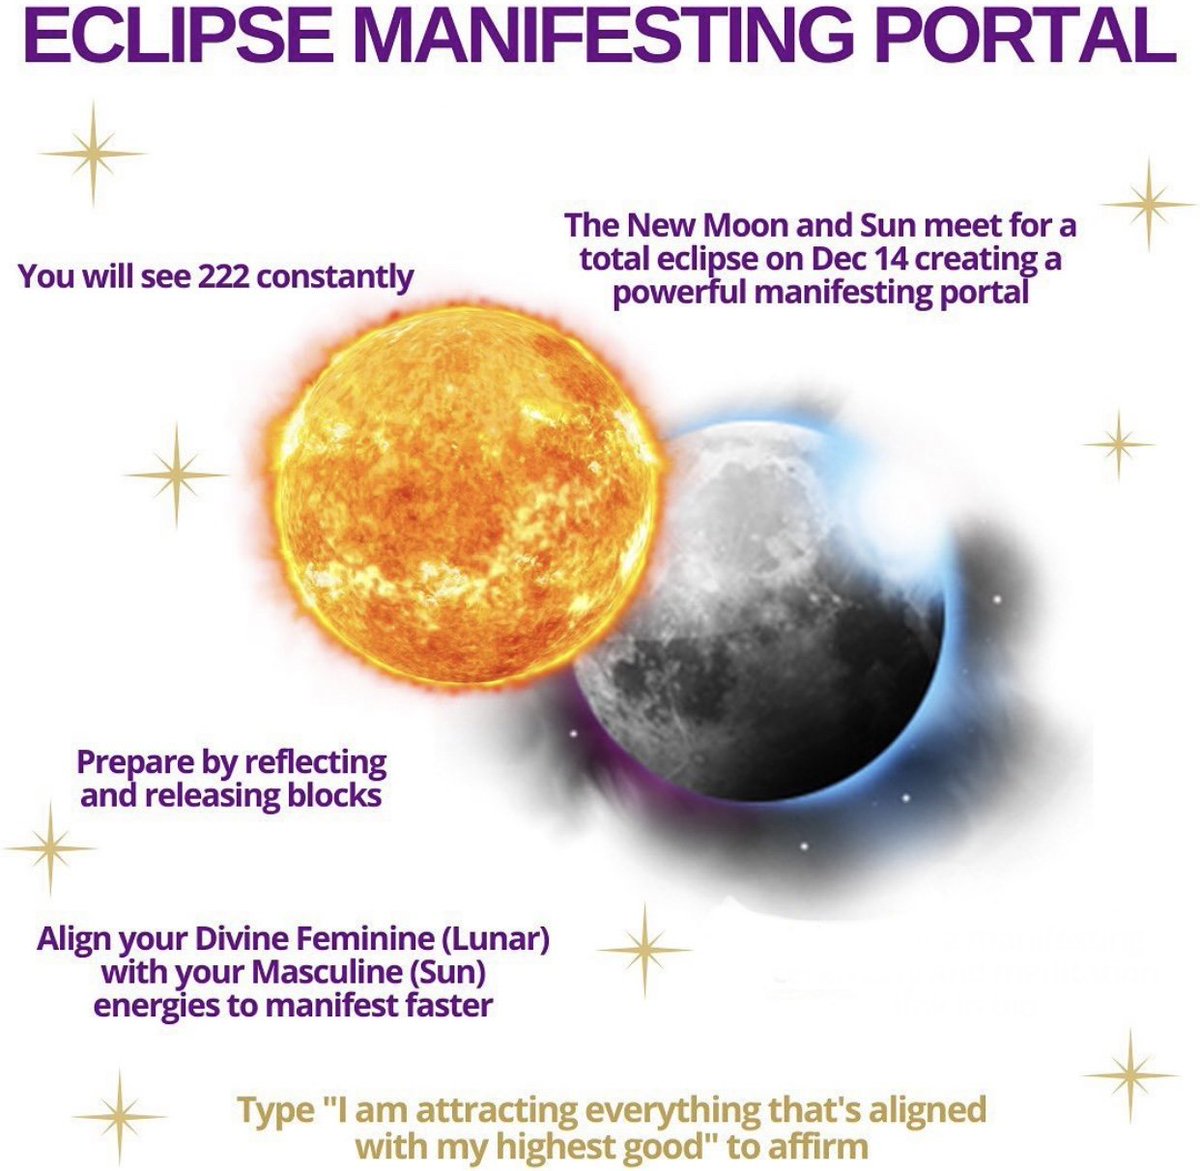 The New Moon& Sunwill meet for a Total Eclipse on 12/14/2020 creating a powerful manifesting portal. & it's important that you do that before the Eclipse Manifesting Portal on 12/14Spend this week preparing for the Eclipse Manifesting Portal 12/14 & The Shift of 12/21